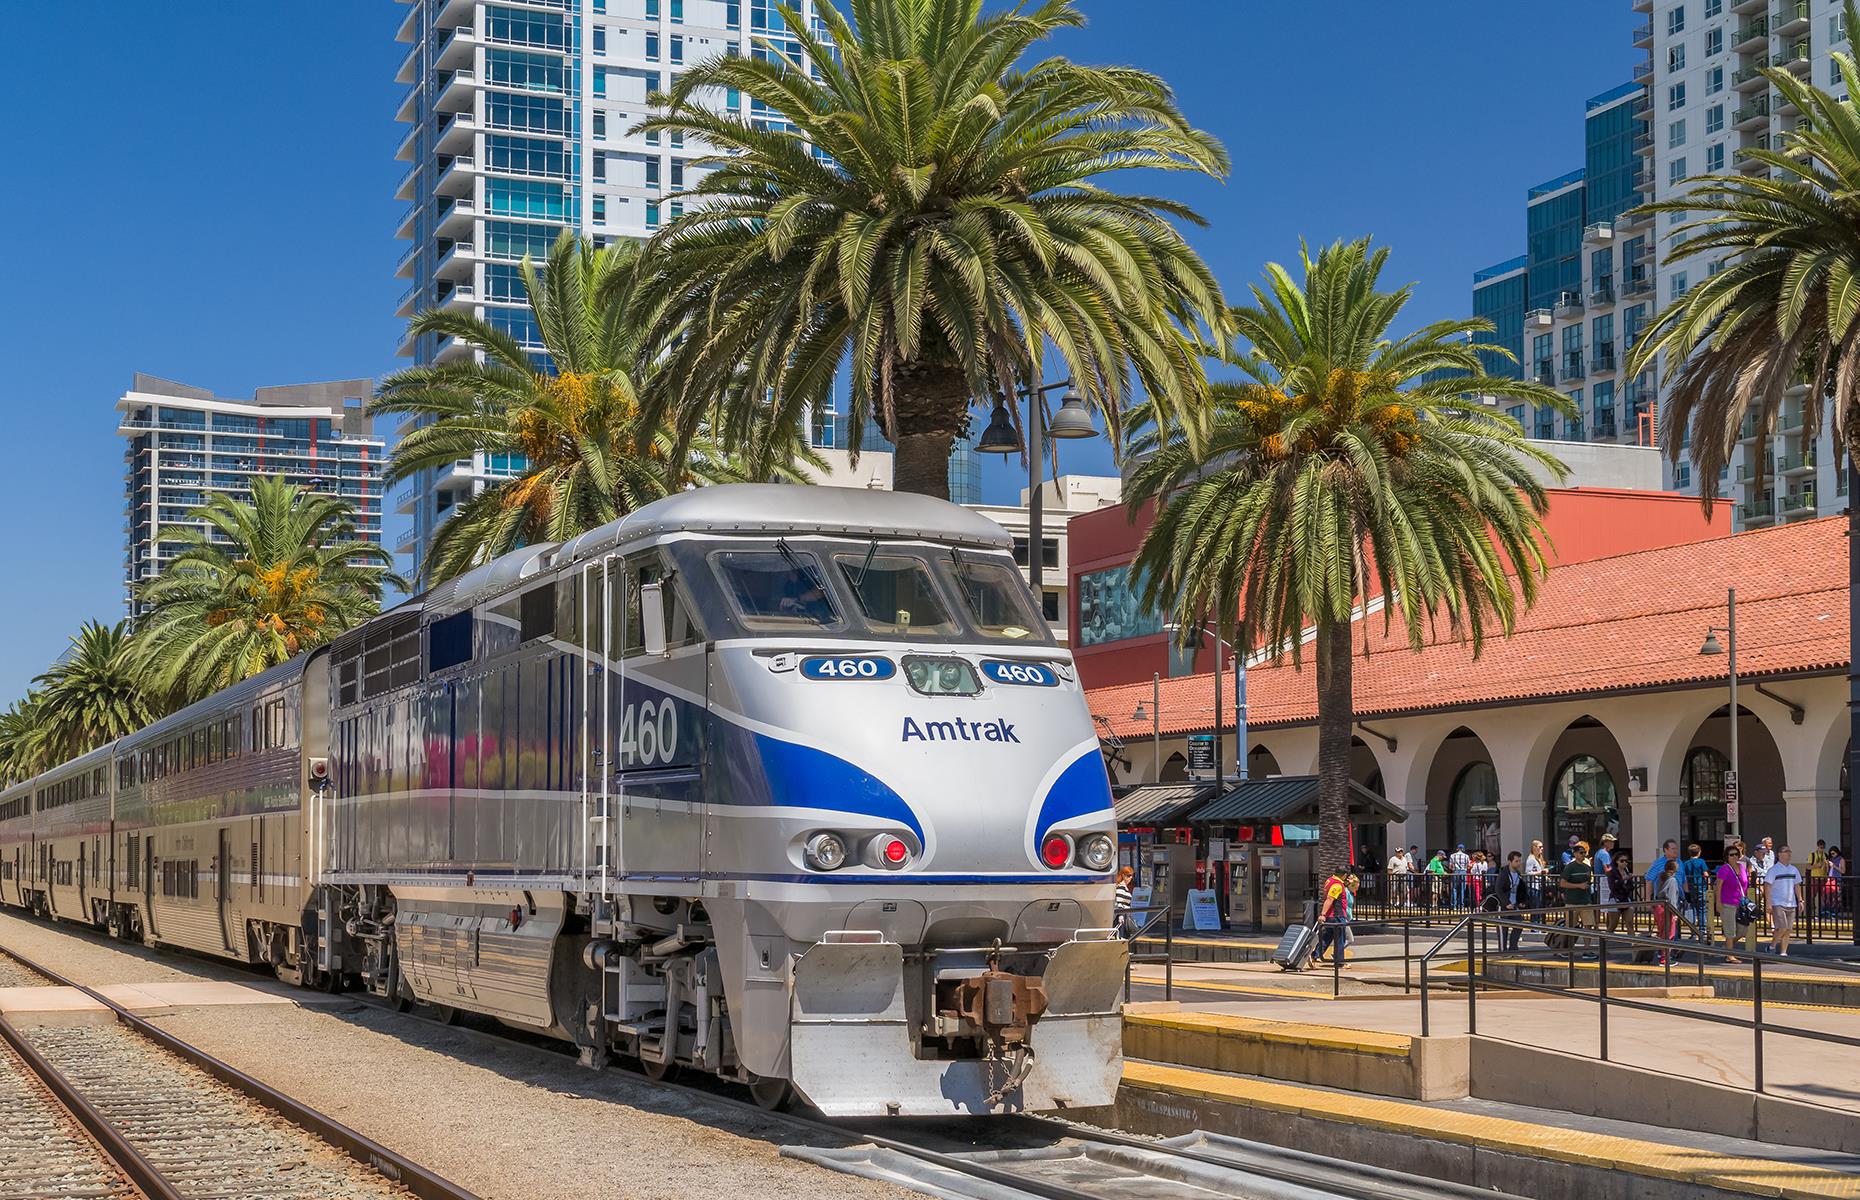 <p>One-way fares start from $60.70 (£49) and the full journey takes just under six hours. The route offers 11 daily round-trip services between San Diego and Los Angeles, and five between Santa Barbara and San Diego so you can be flexible with your itinerary. Take a look at <a href="https://www.loveexploring.com/guides/74496/explore-san-diego-where-to-stay-what-to-eat-the-top-things-to-do">our guide to San Diego</a> and discover <a href="https://www.loveexploring.com/news/84605/what-to-see-do-where-to-stay-san-luis-obispo-california">the best things to do in San Luis Obispo</a>.</p>